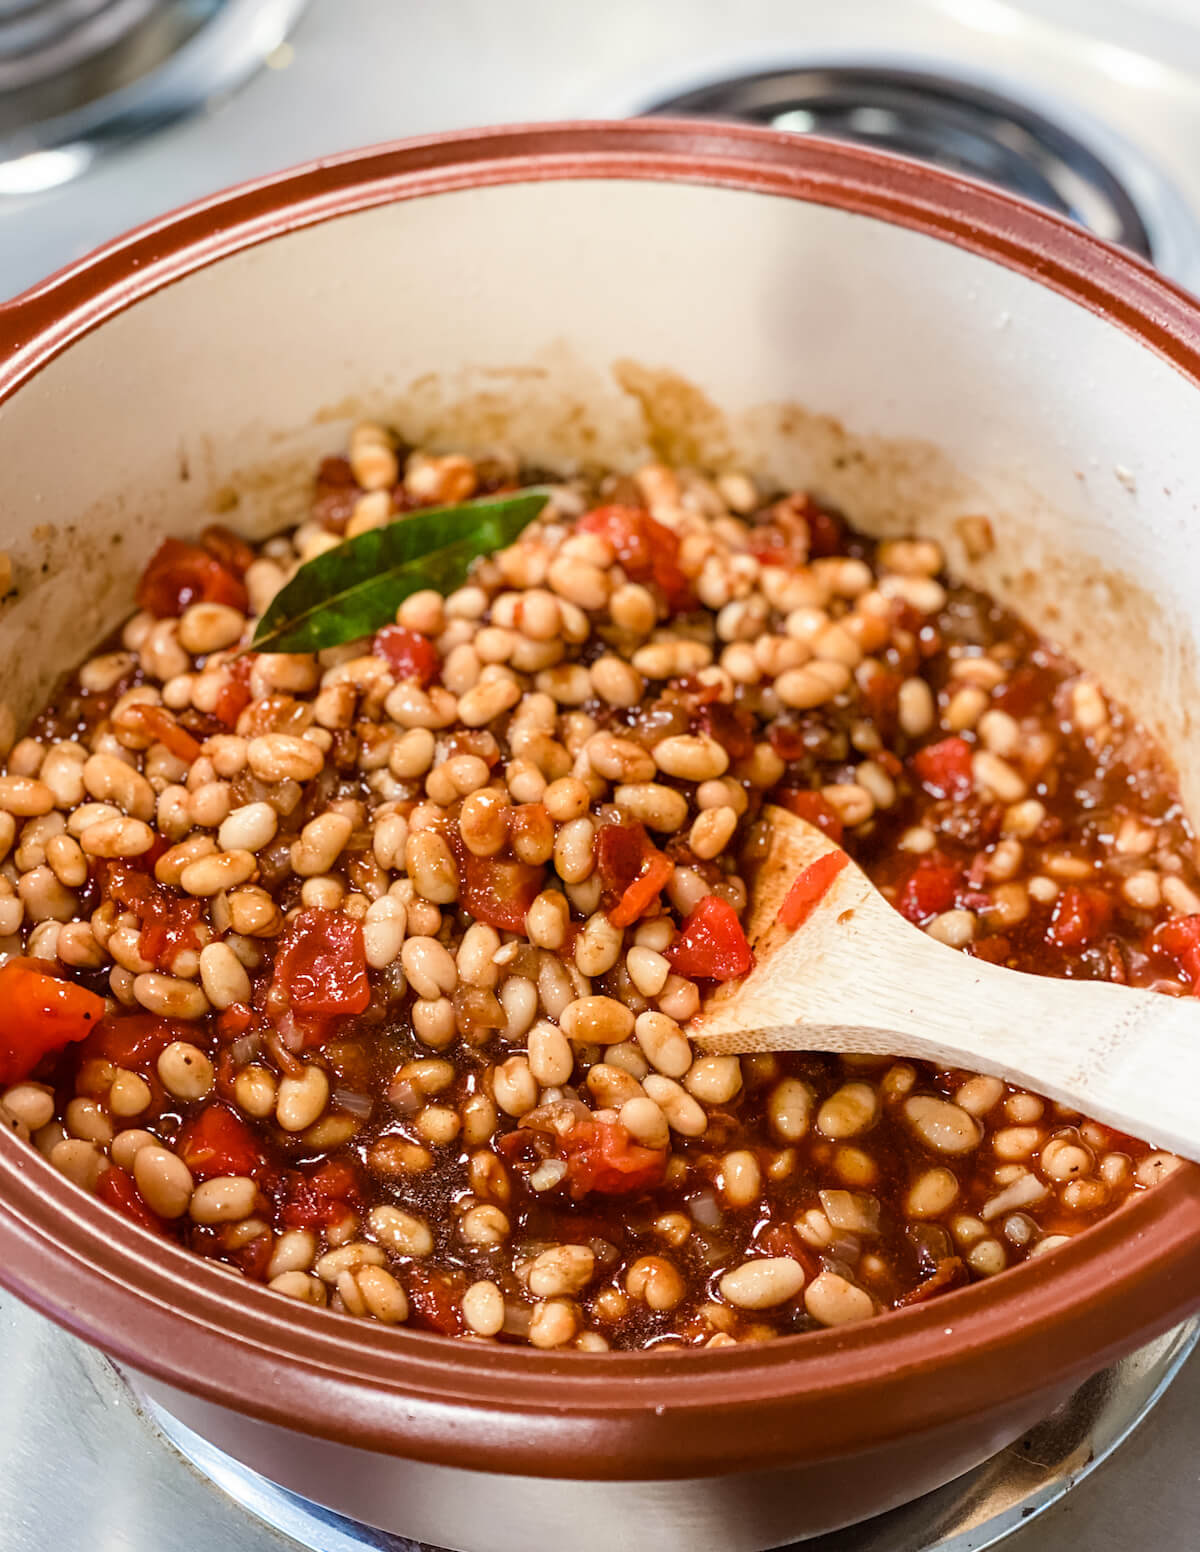 process of boston baked beans in pot with ingredients